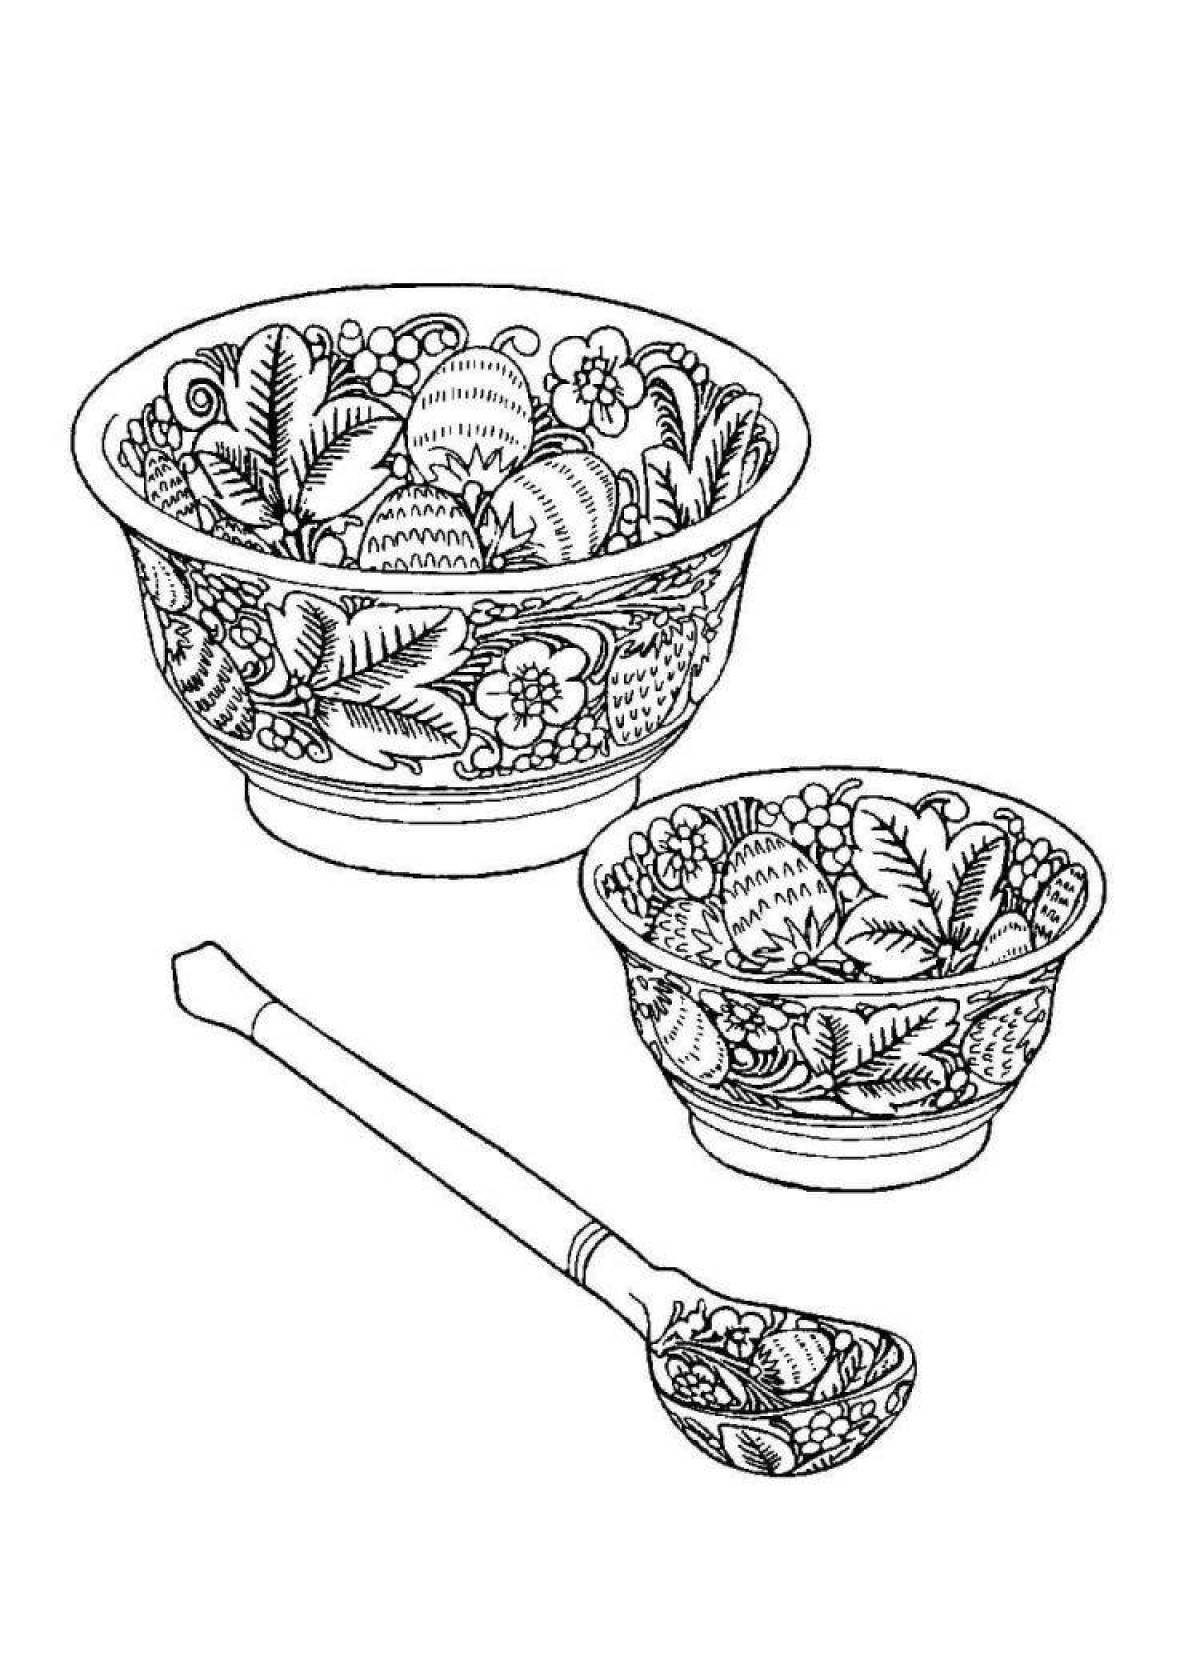 Fun coloring book with a spoon